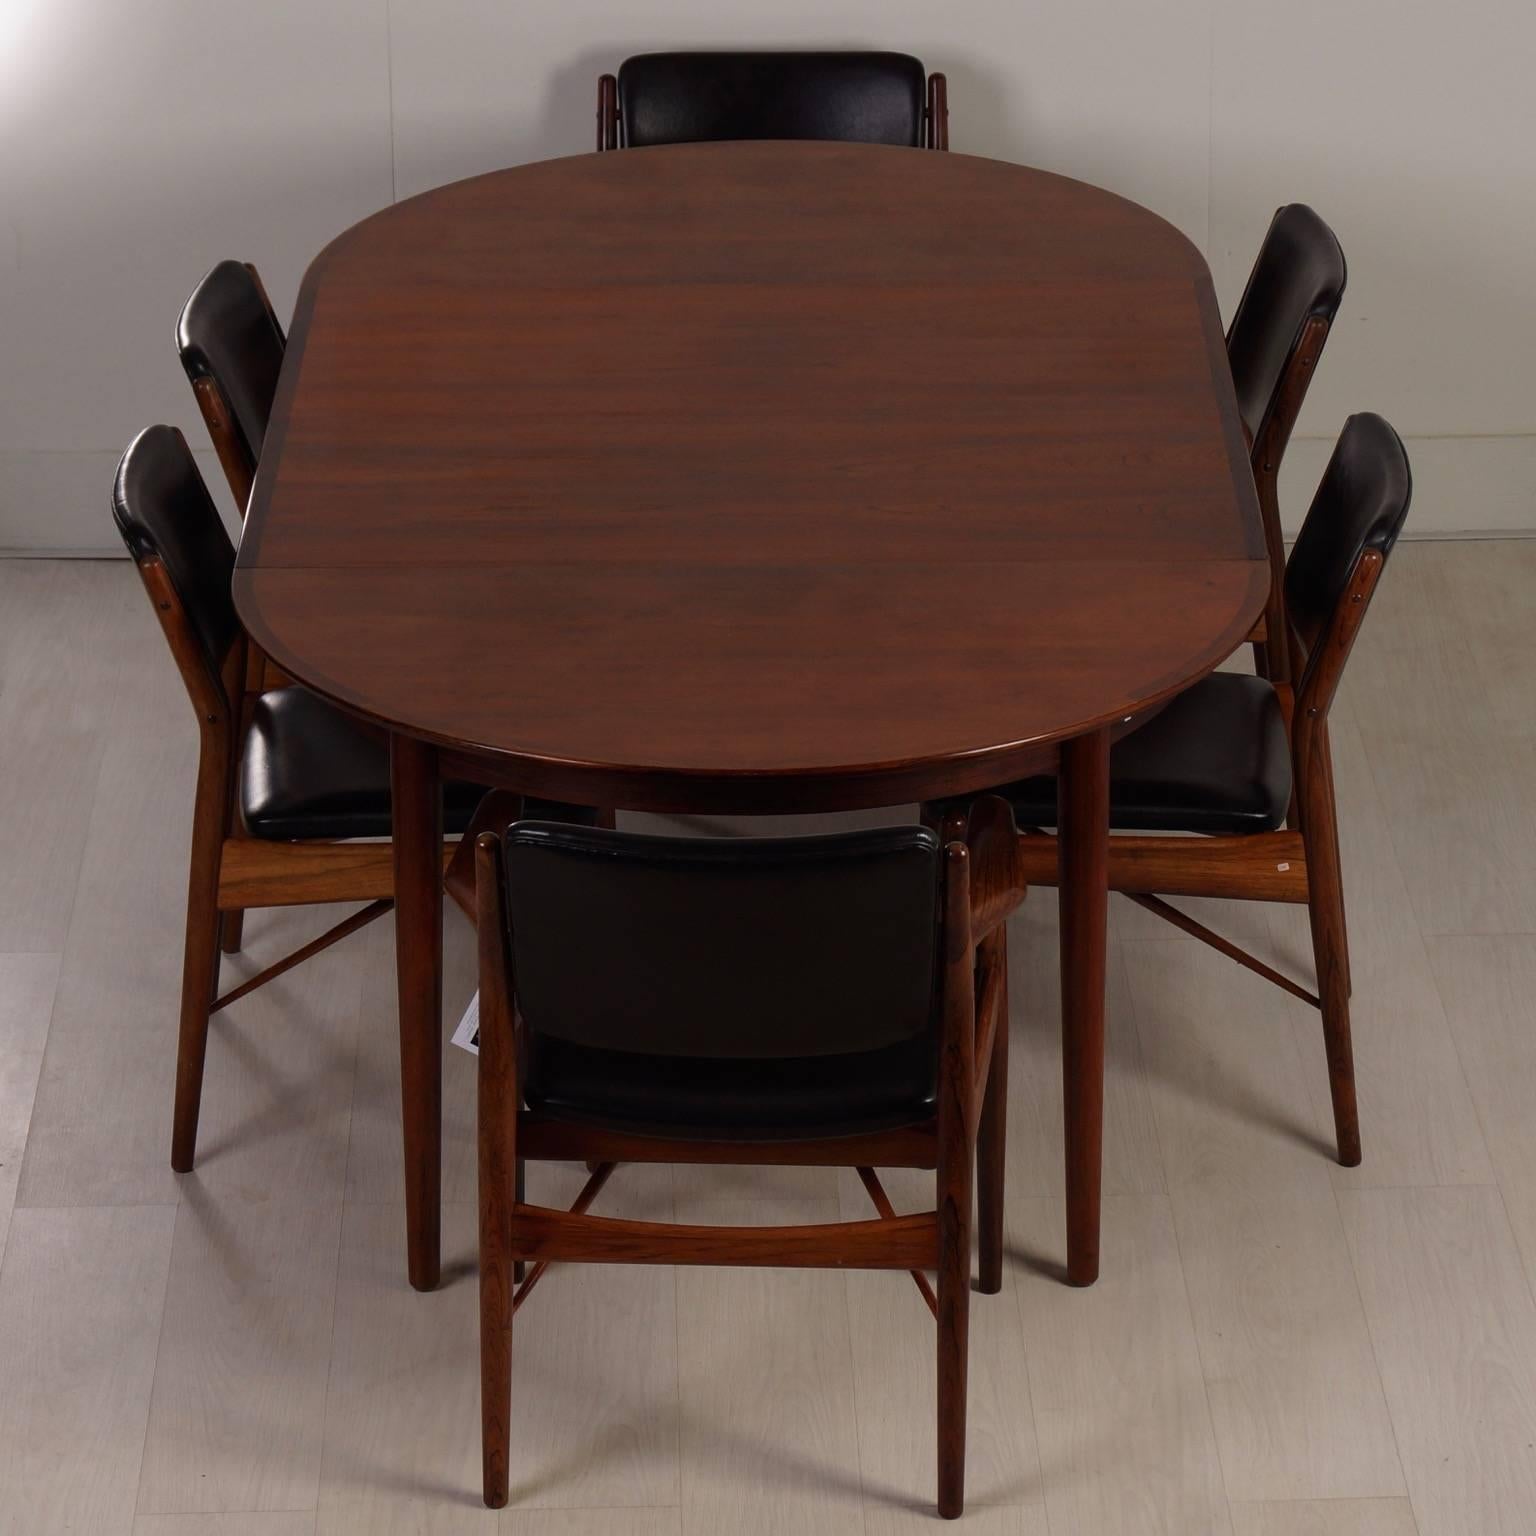 Large Danish dining set designed by Arne Vodder for Sibast from around 1960. This beautiful dining table with six chairs comes from the first owner who bought the set in the early 1960s. This dining set has two extendable leaves. The leaves may